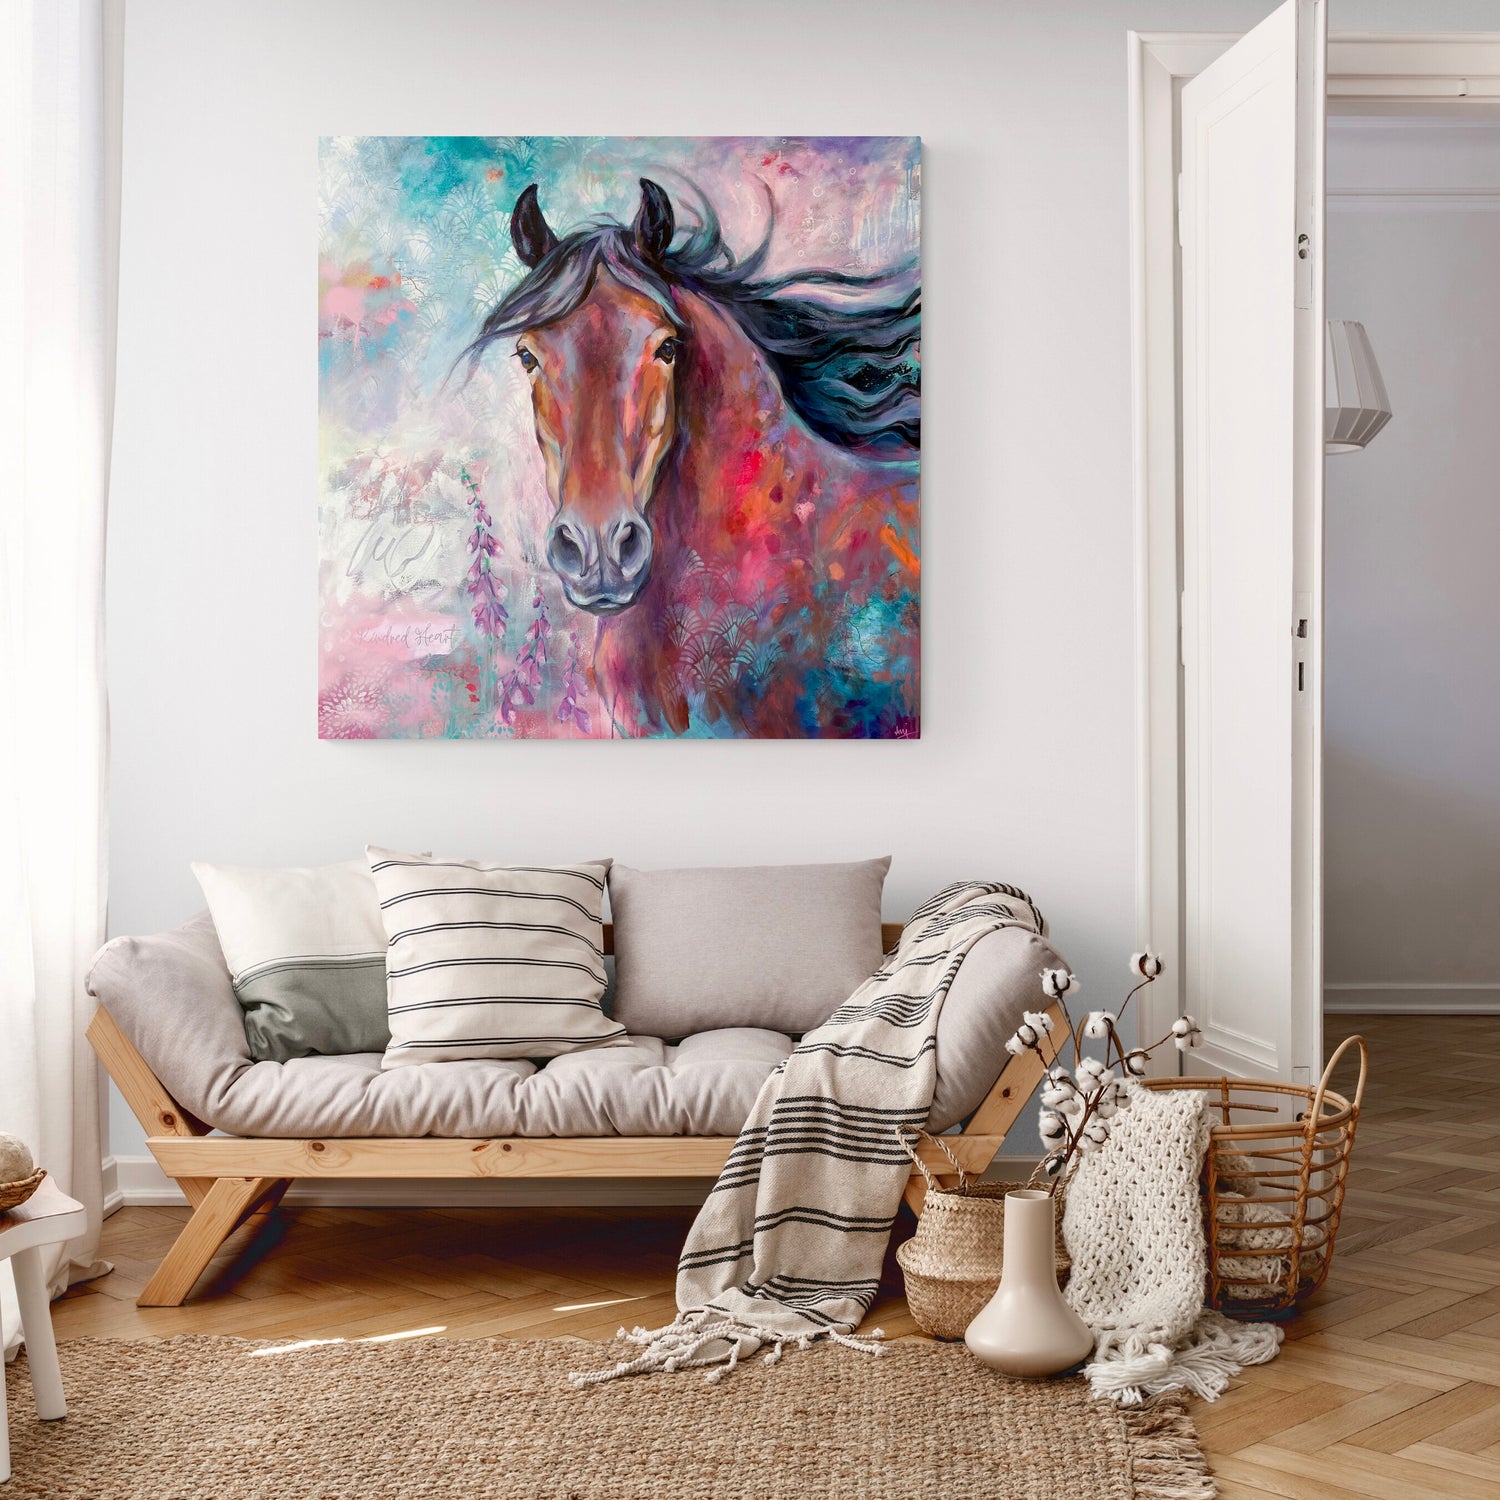 Colourful large horse painting hanging in a cosy living room